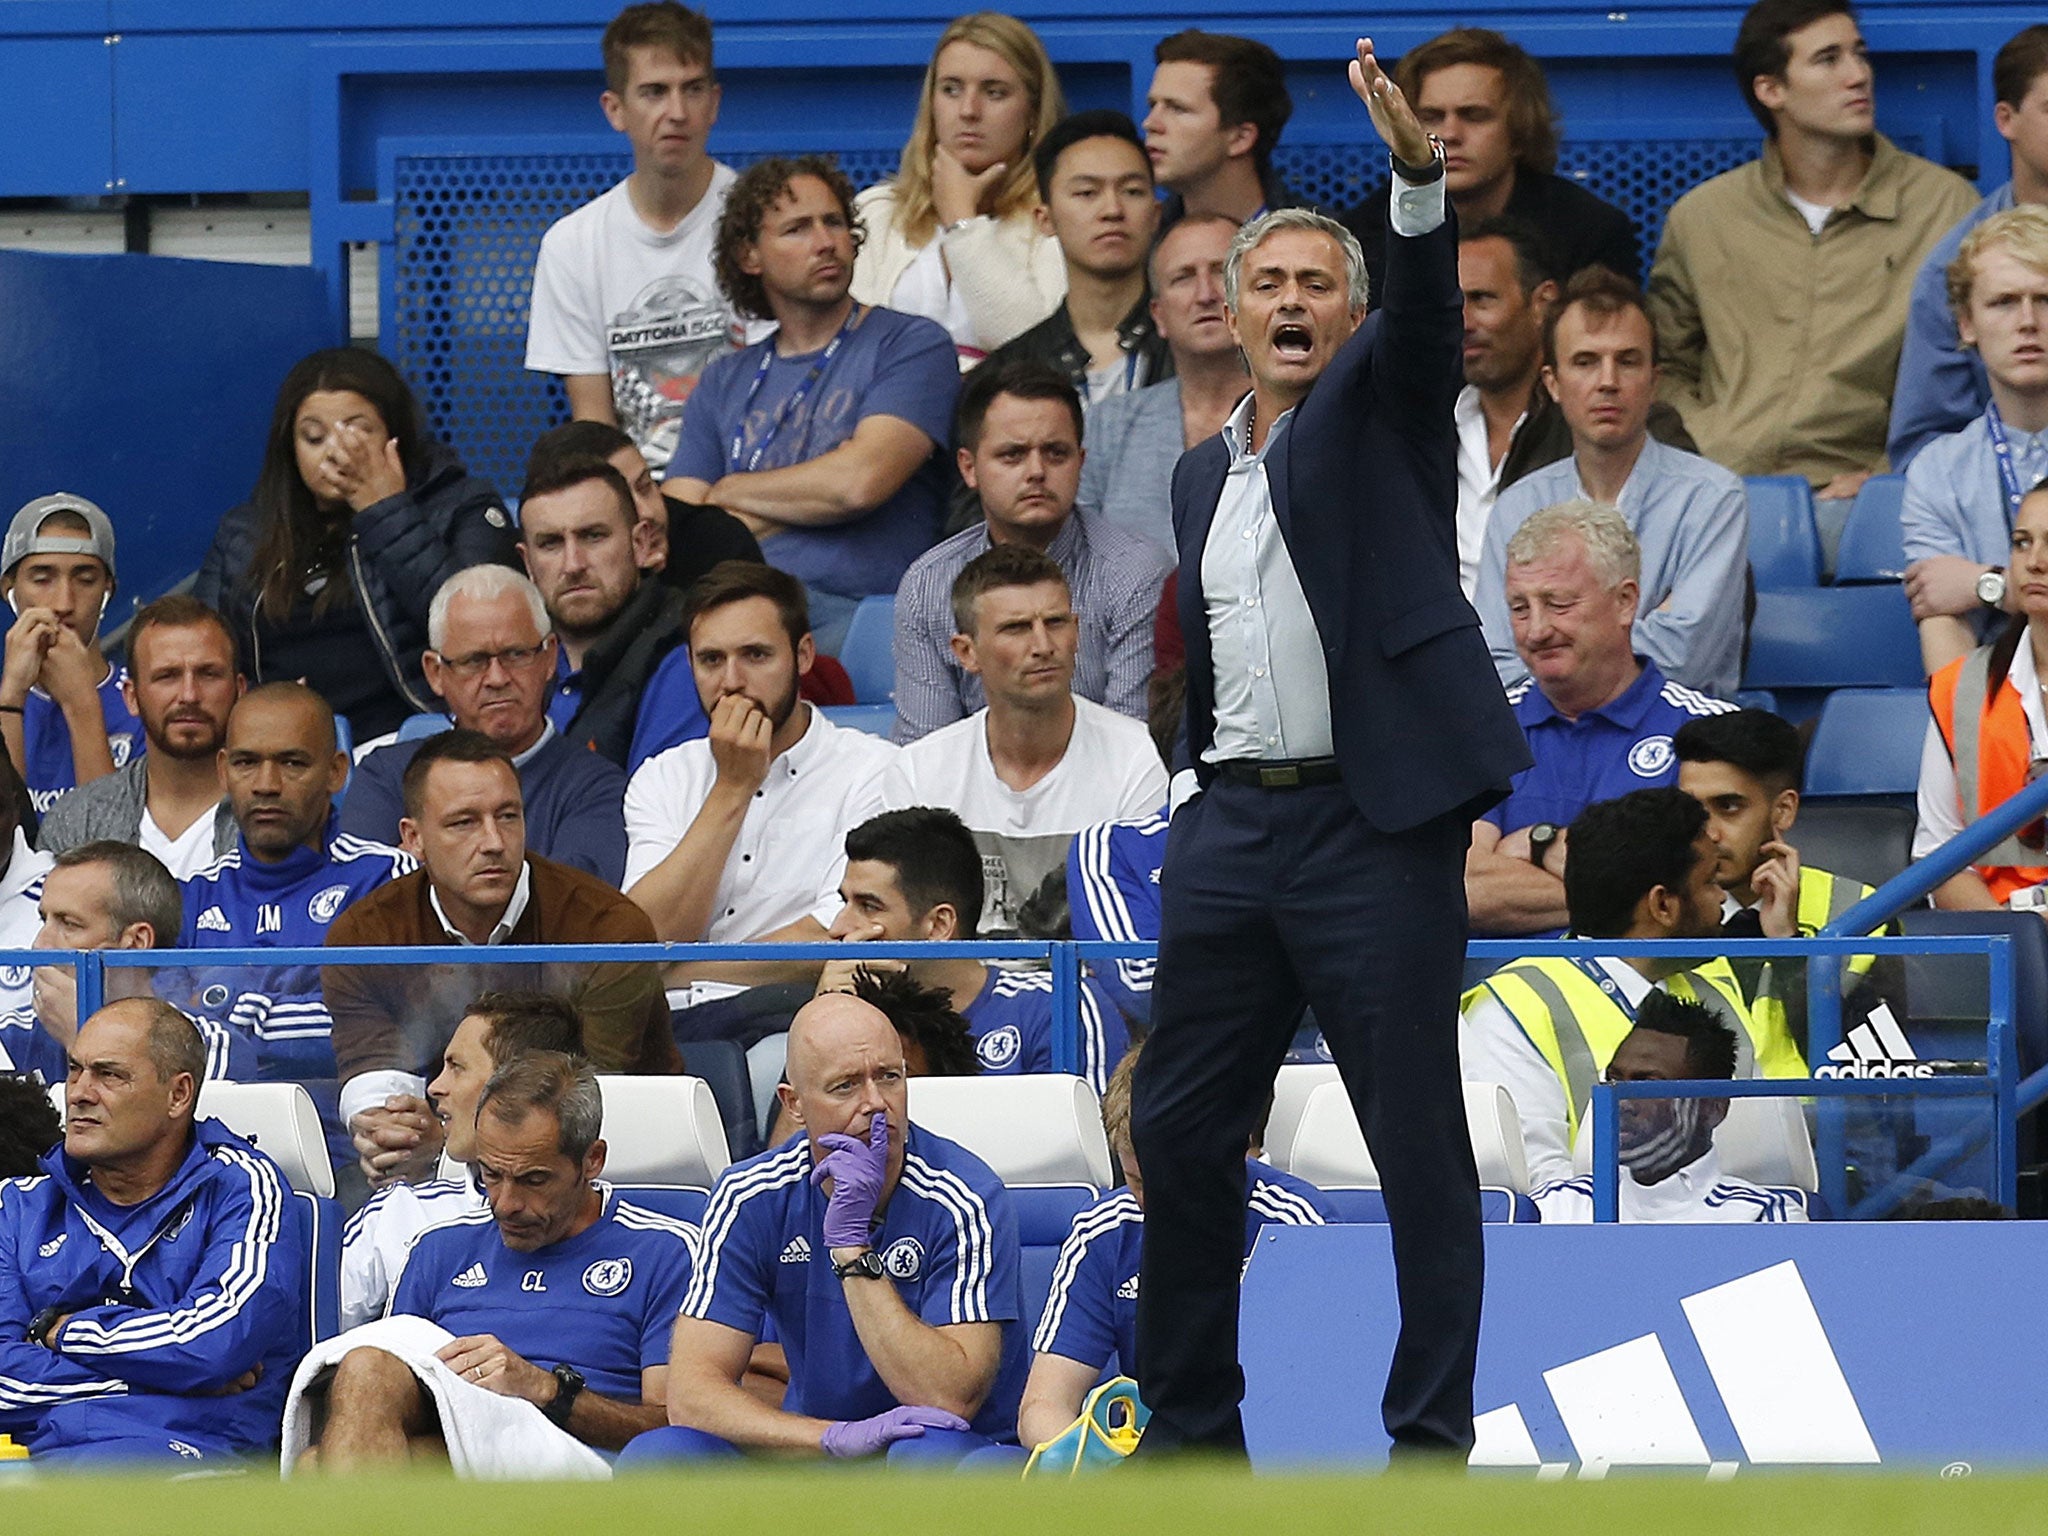 Jose Mourinho gestures from the sidelines